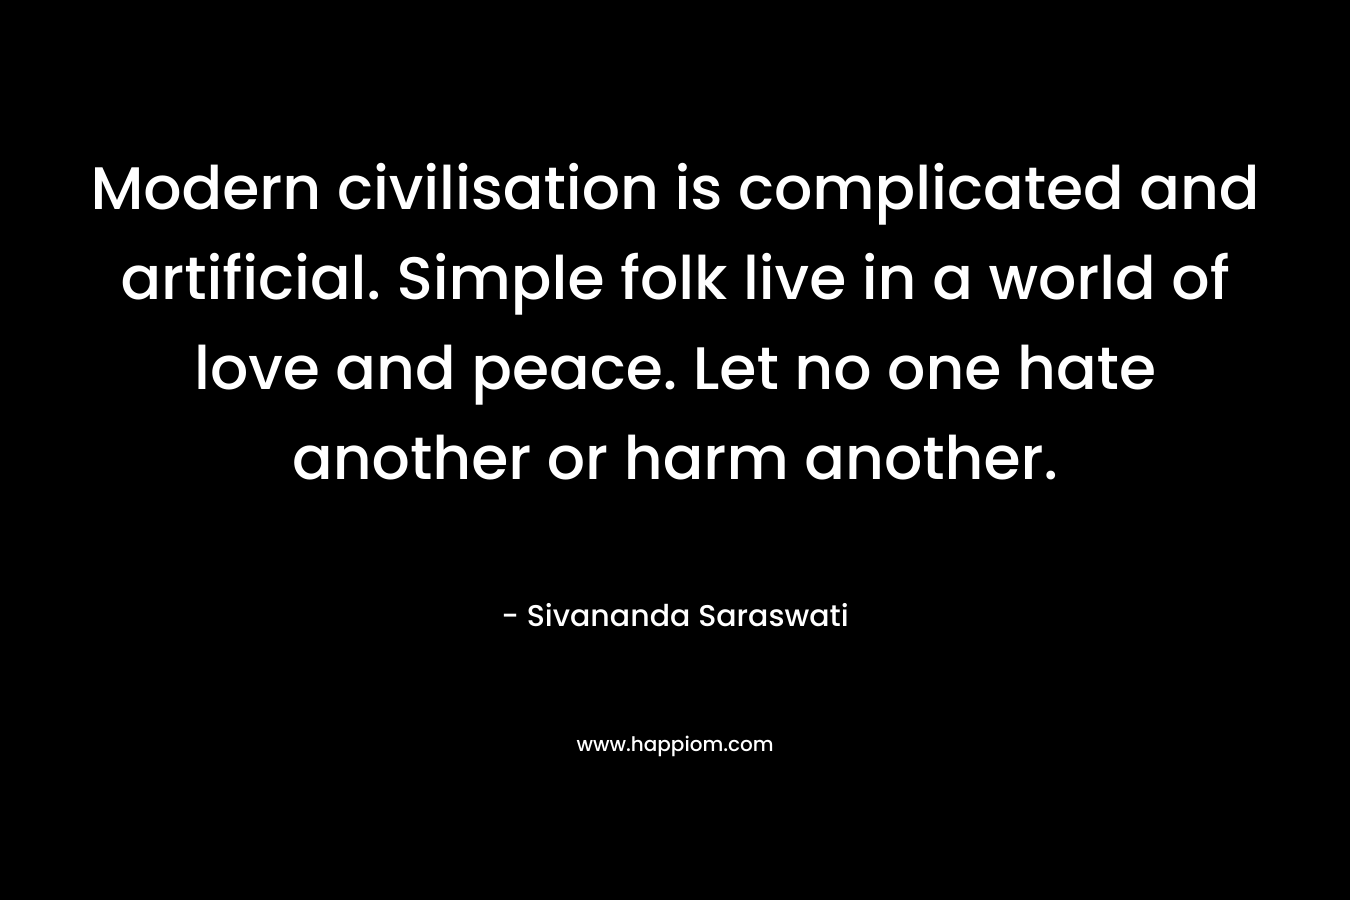 Modern civilisation is complicated and artificial. Simple folk live in a world of love and peace. Let no one hate another or harm another. – Sivananda Saraswati